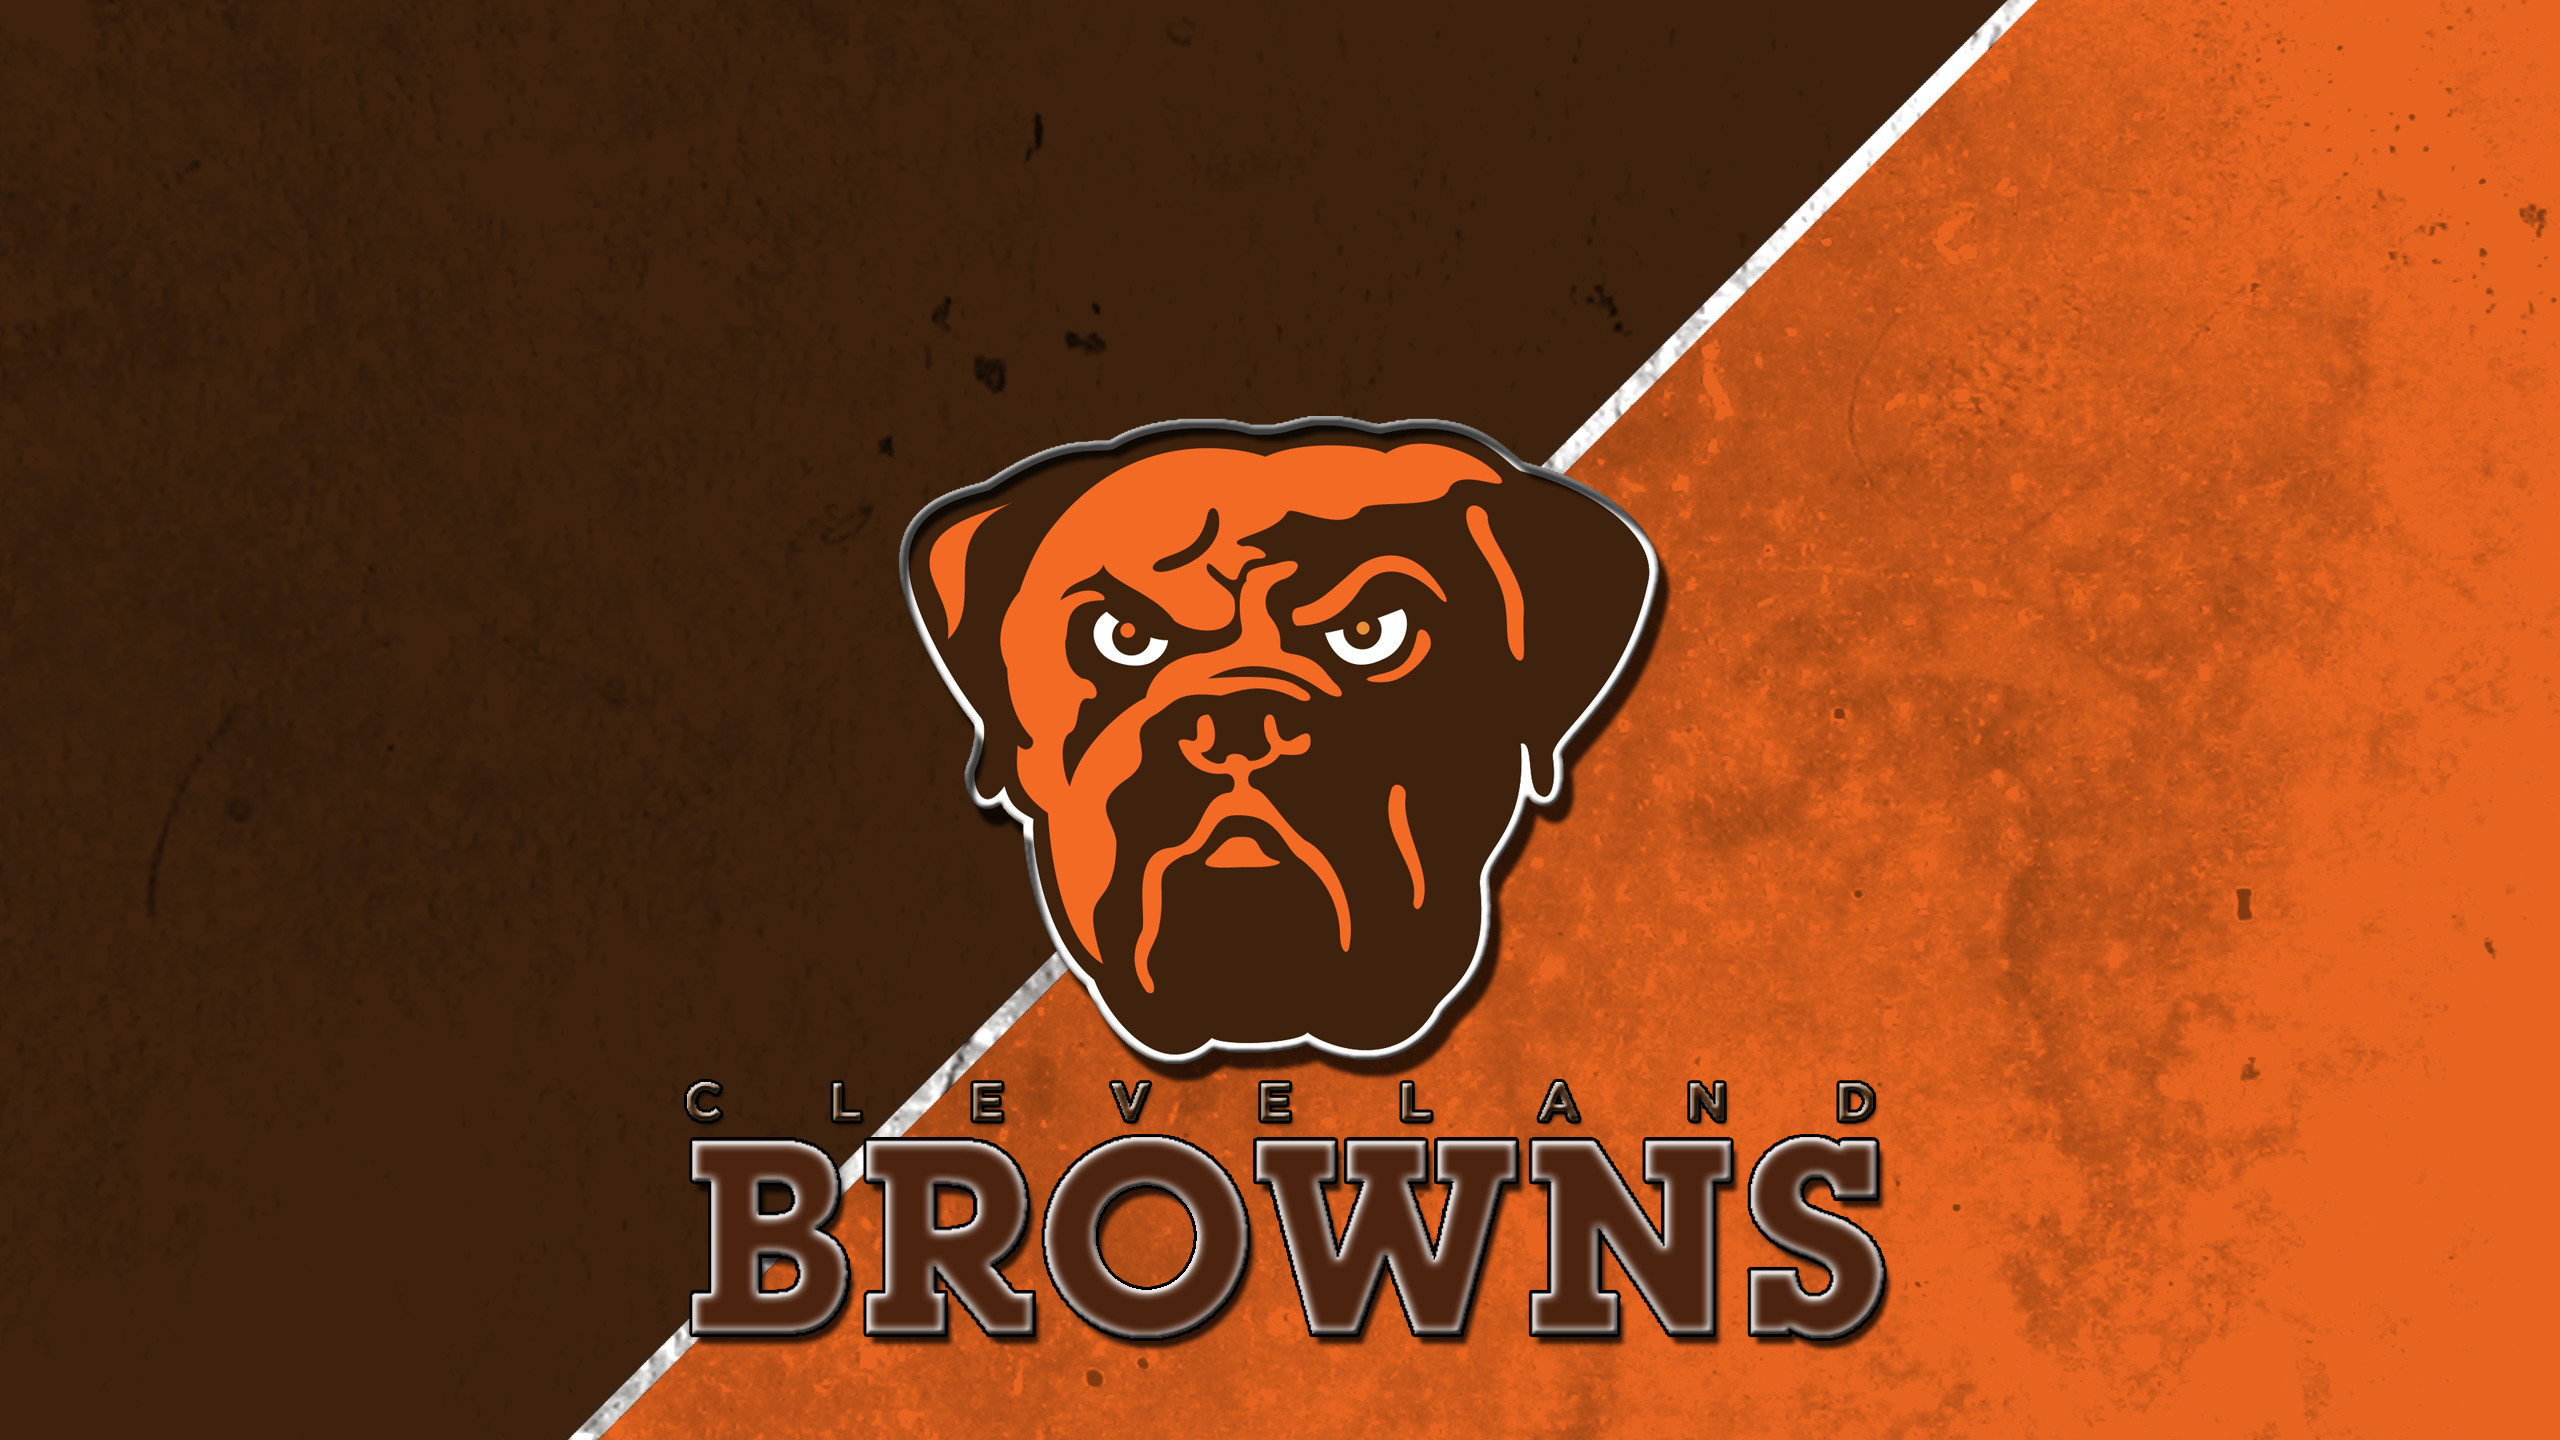 2560x1440  Cleveland Browns by BeAware8 Cleveland Browns by BeAware8